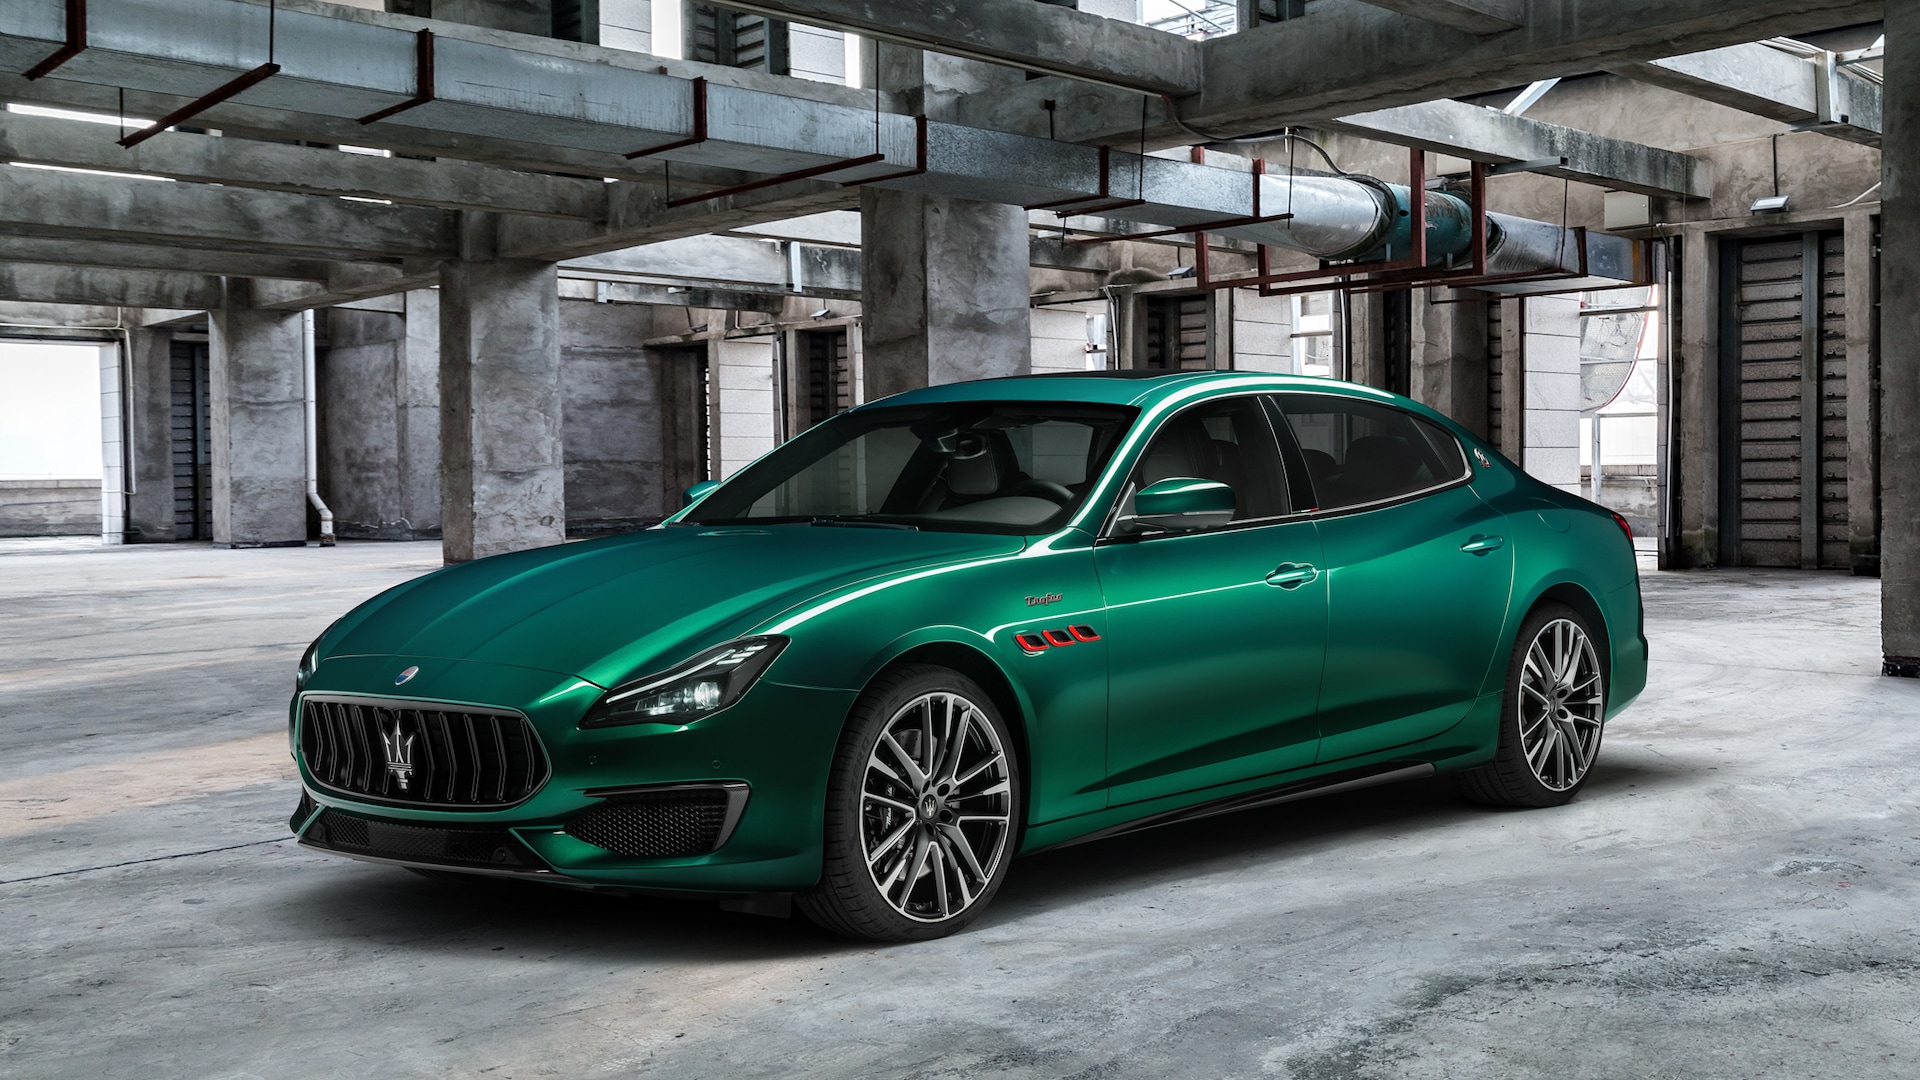 2021 Maserati Quattroporte Prices, Reviews, and Photos - MotorTrend